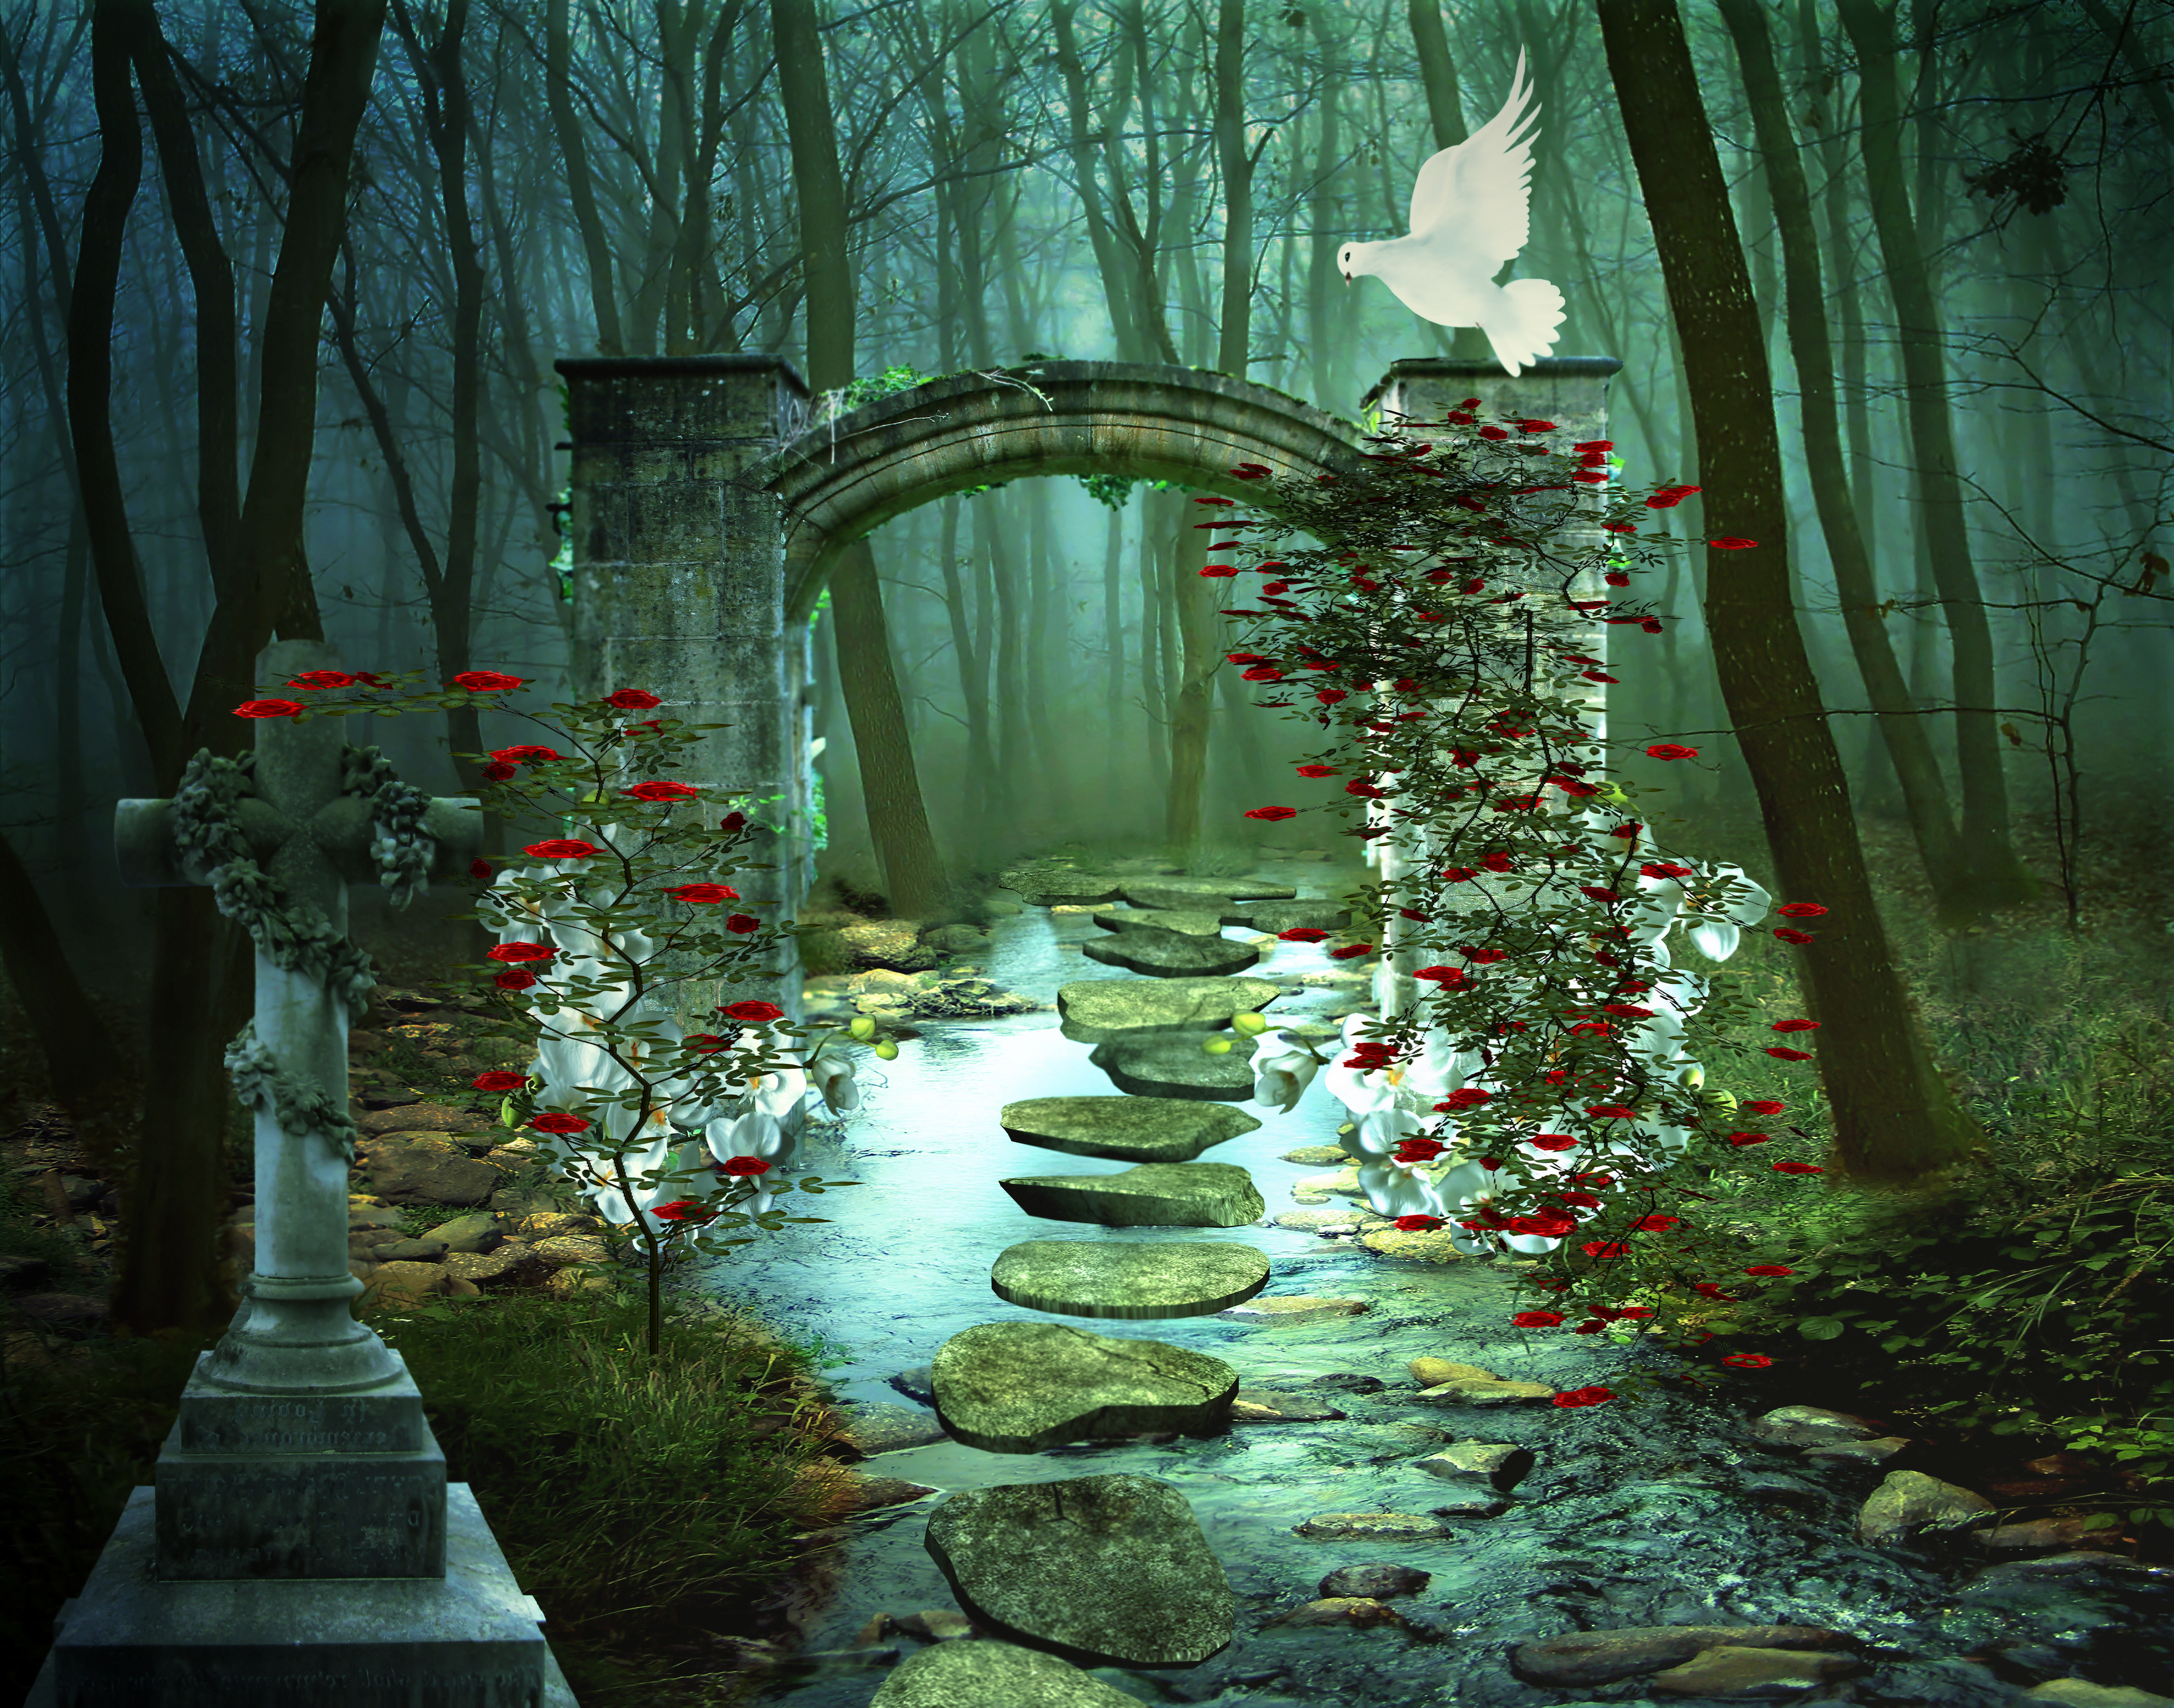 dove, arch, artistic, forest, columns, magical, red rose, stone